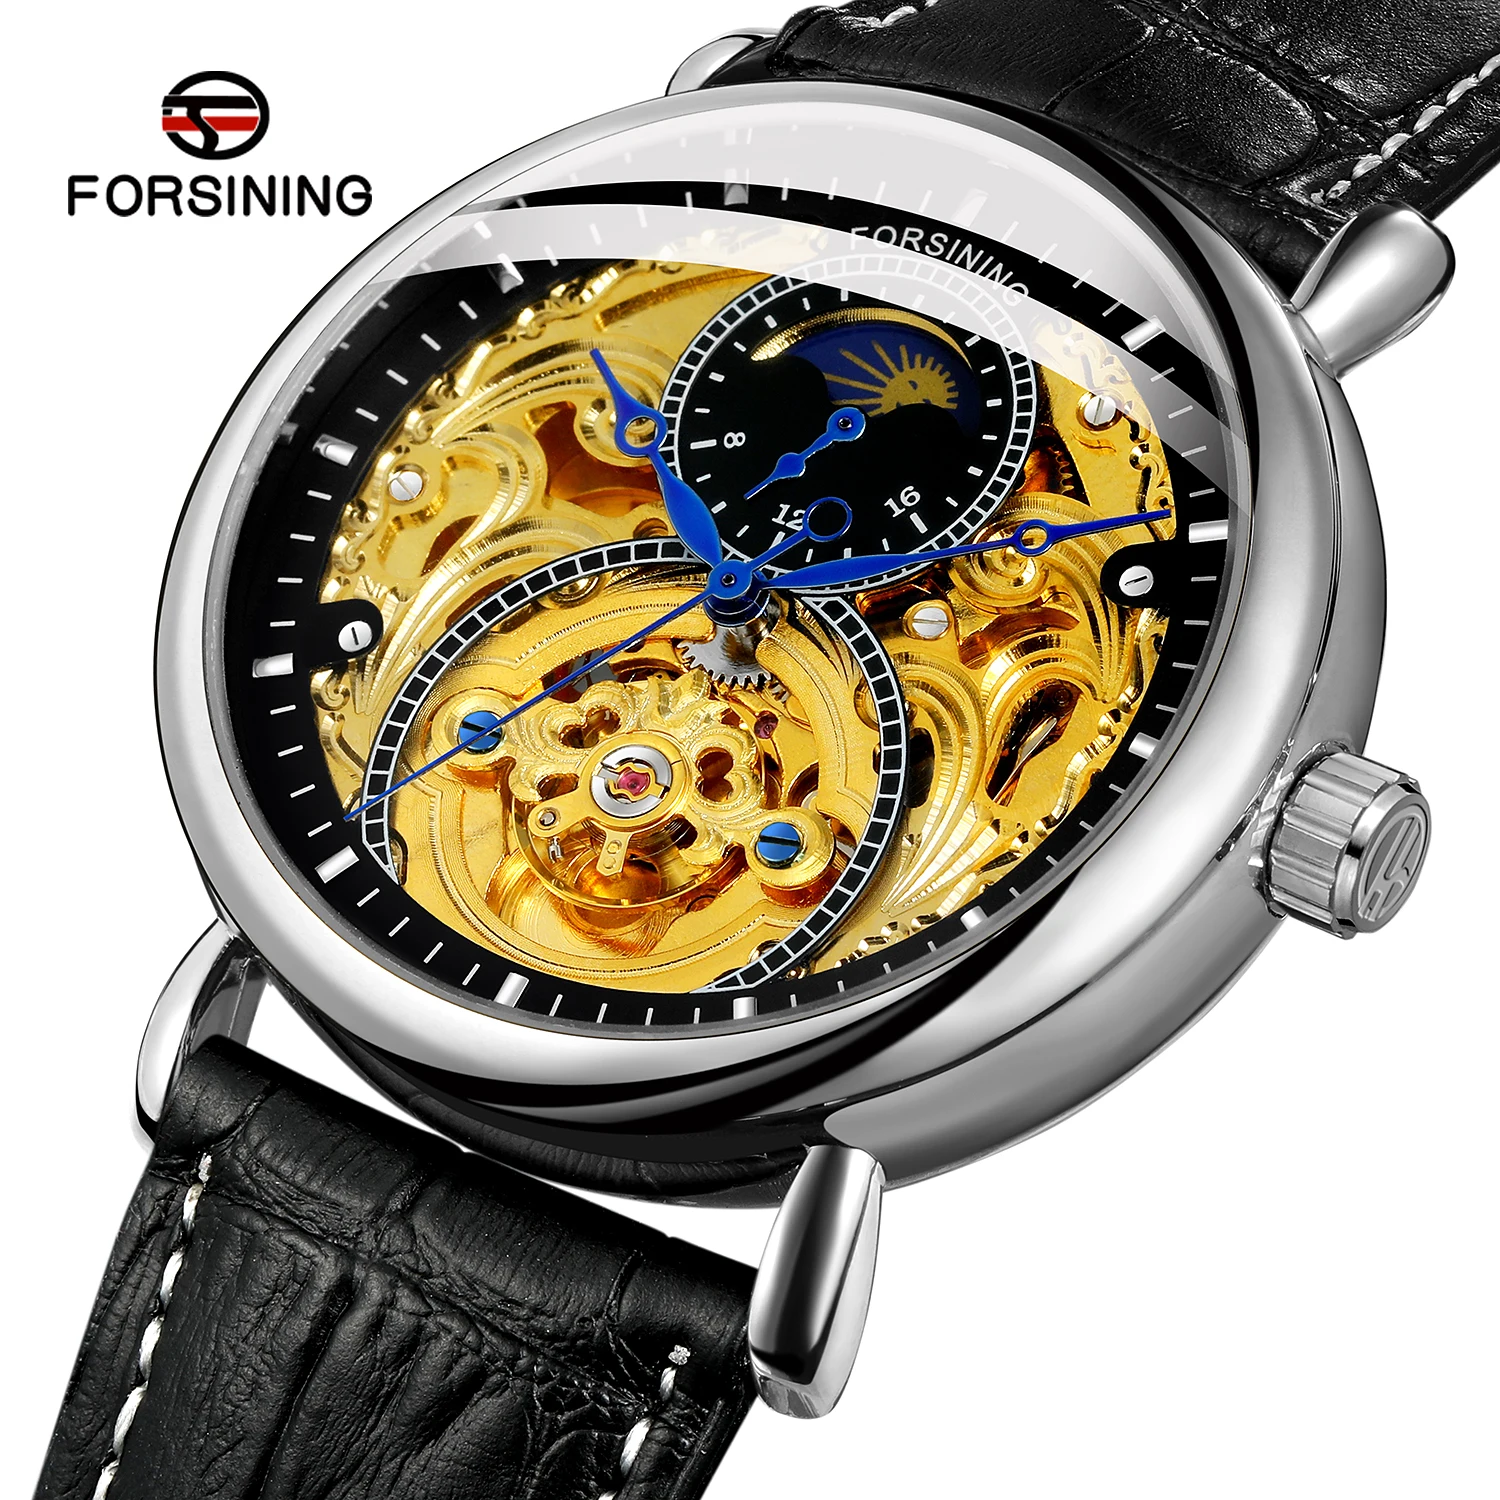 

New Forsining Men Fashion Casual Hollow Moon Phase Automatic Mechanical Watch Luxury Business Leather Man Wristwatches Relogio